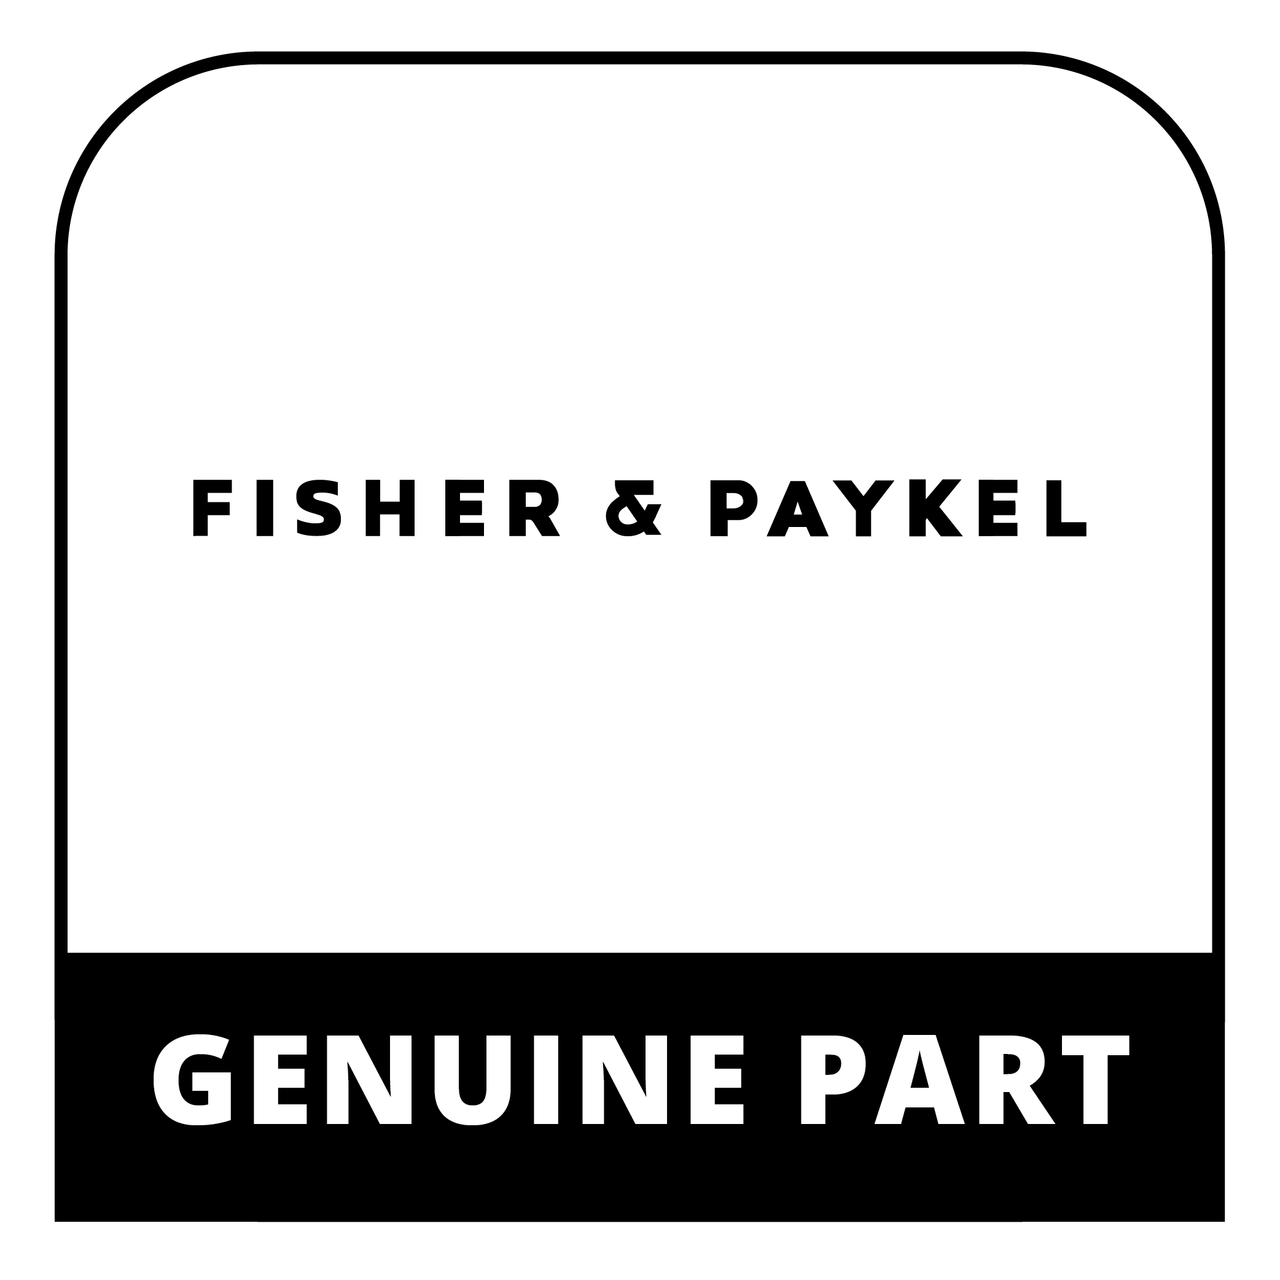 Fisher & Paykel 212666 - Capacitor # 4021298 - Genuine Fisher & Paykel (DCS) Part